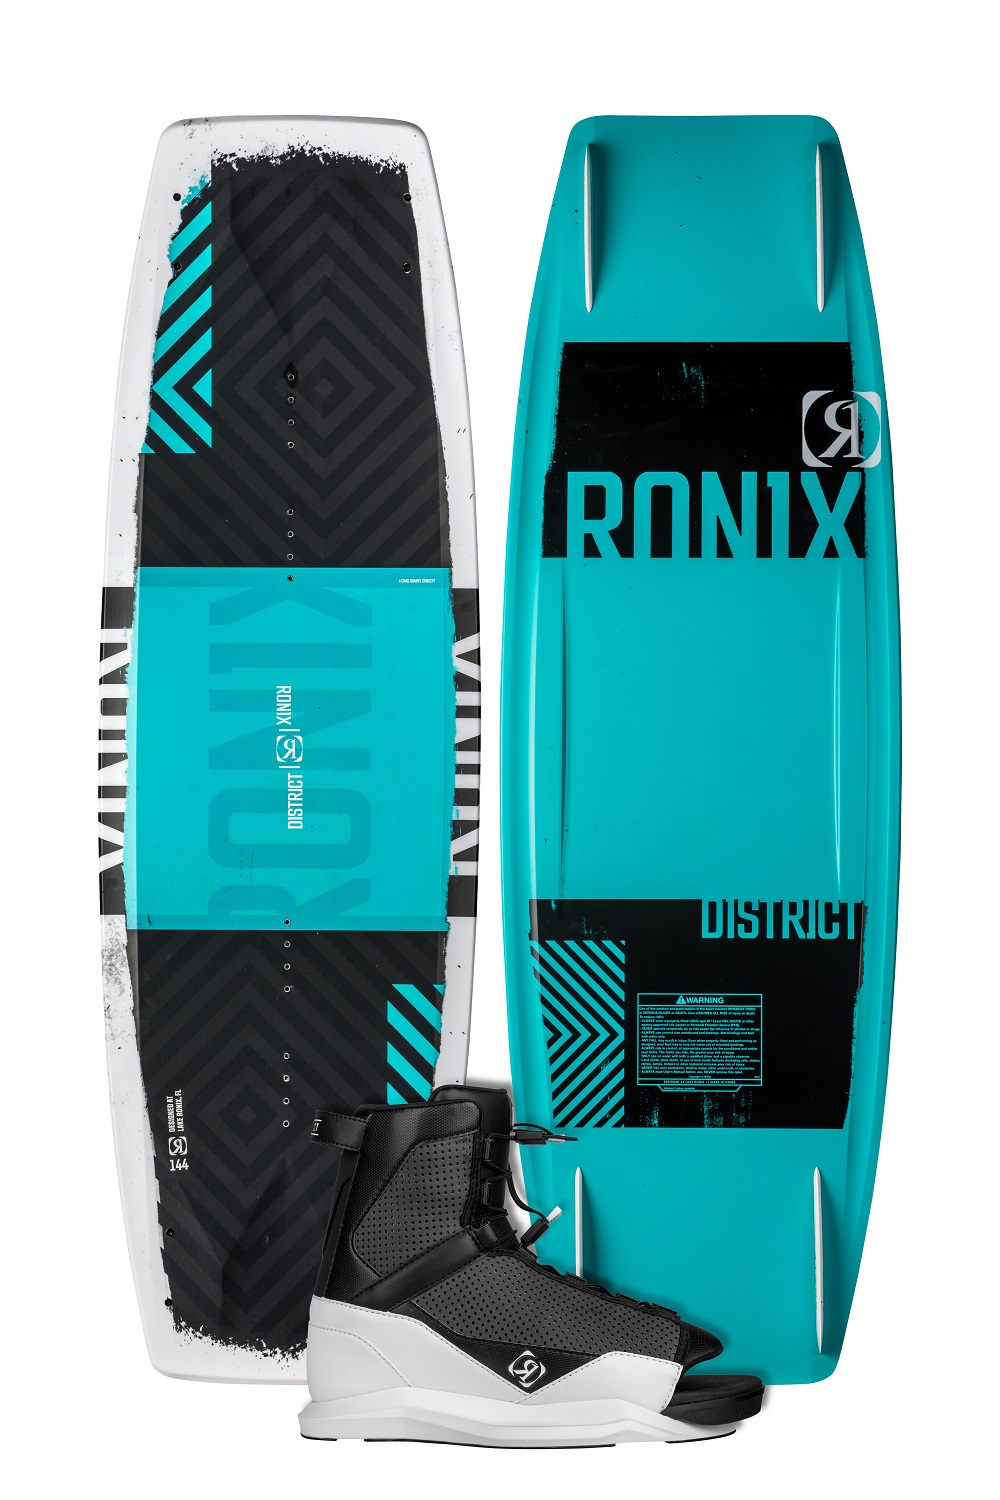 wakeboarding - wakeboss - ronix district